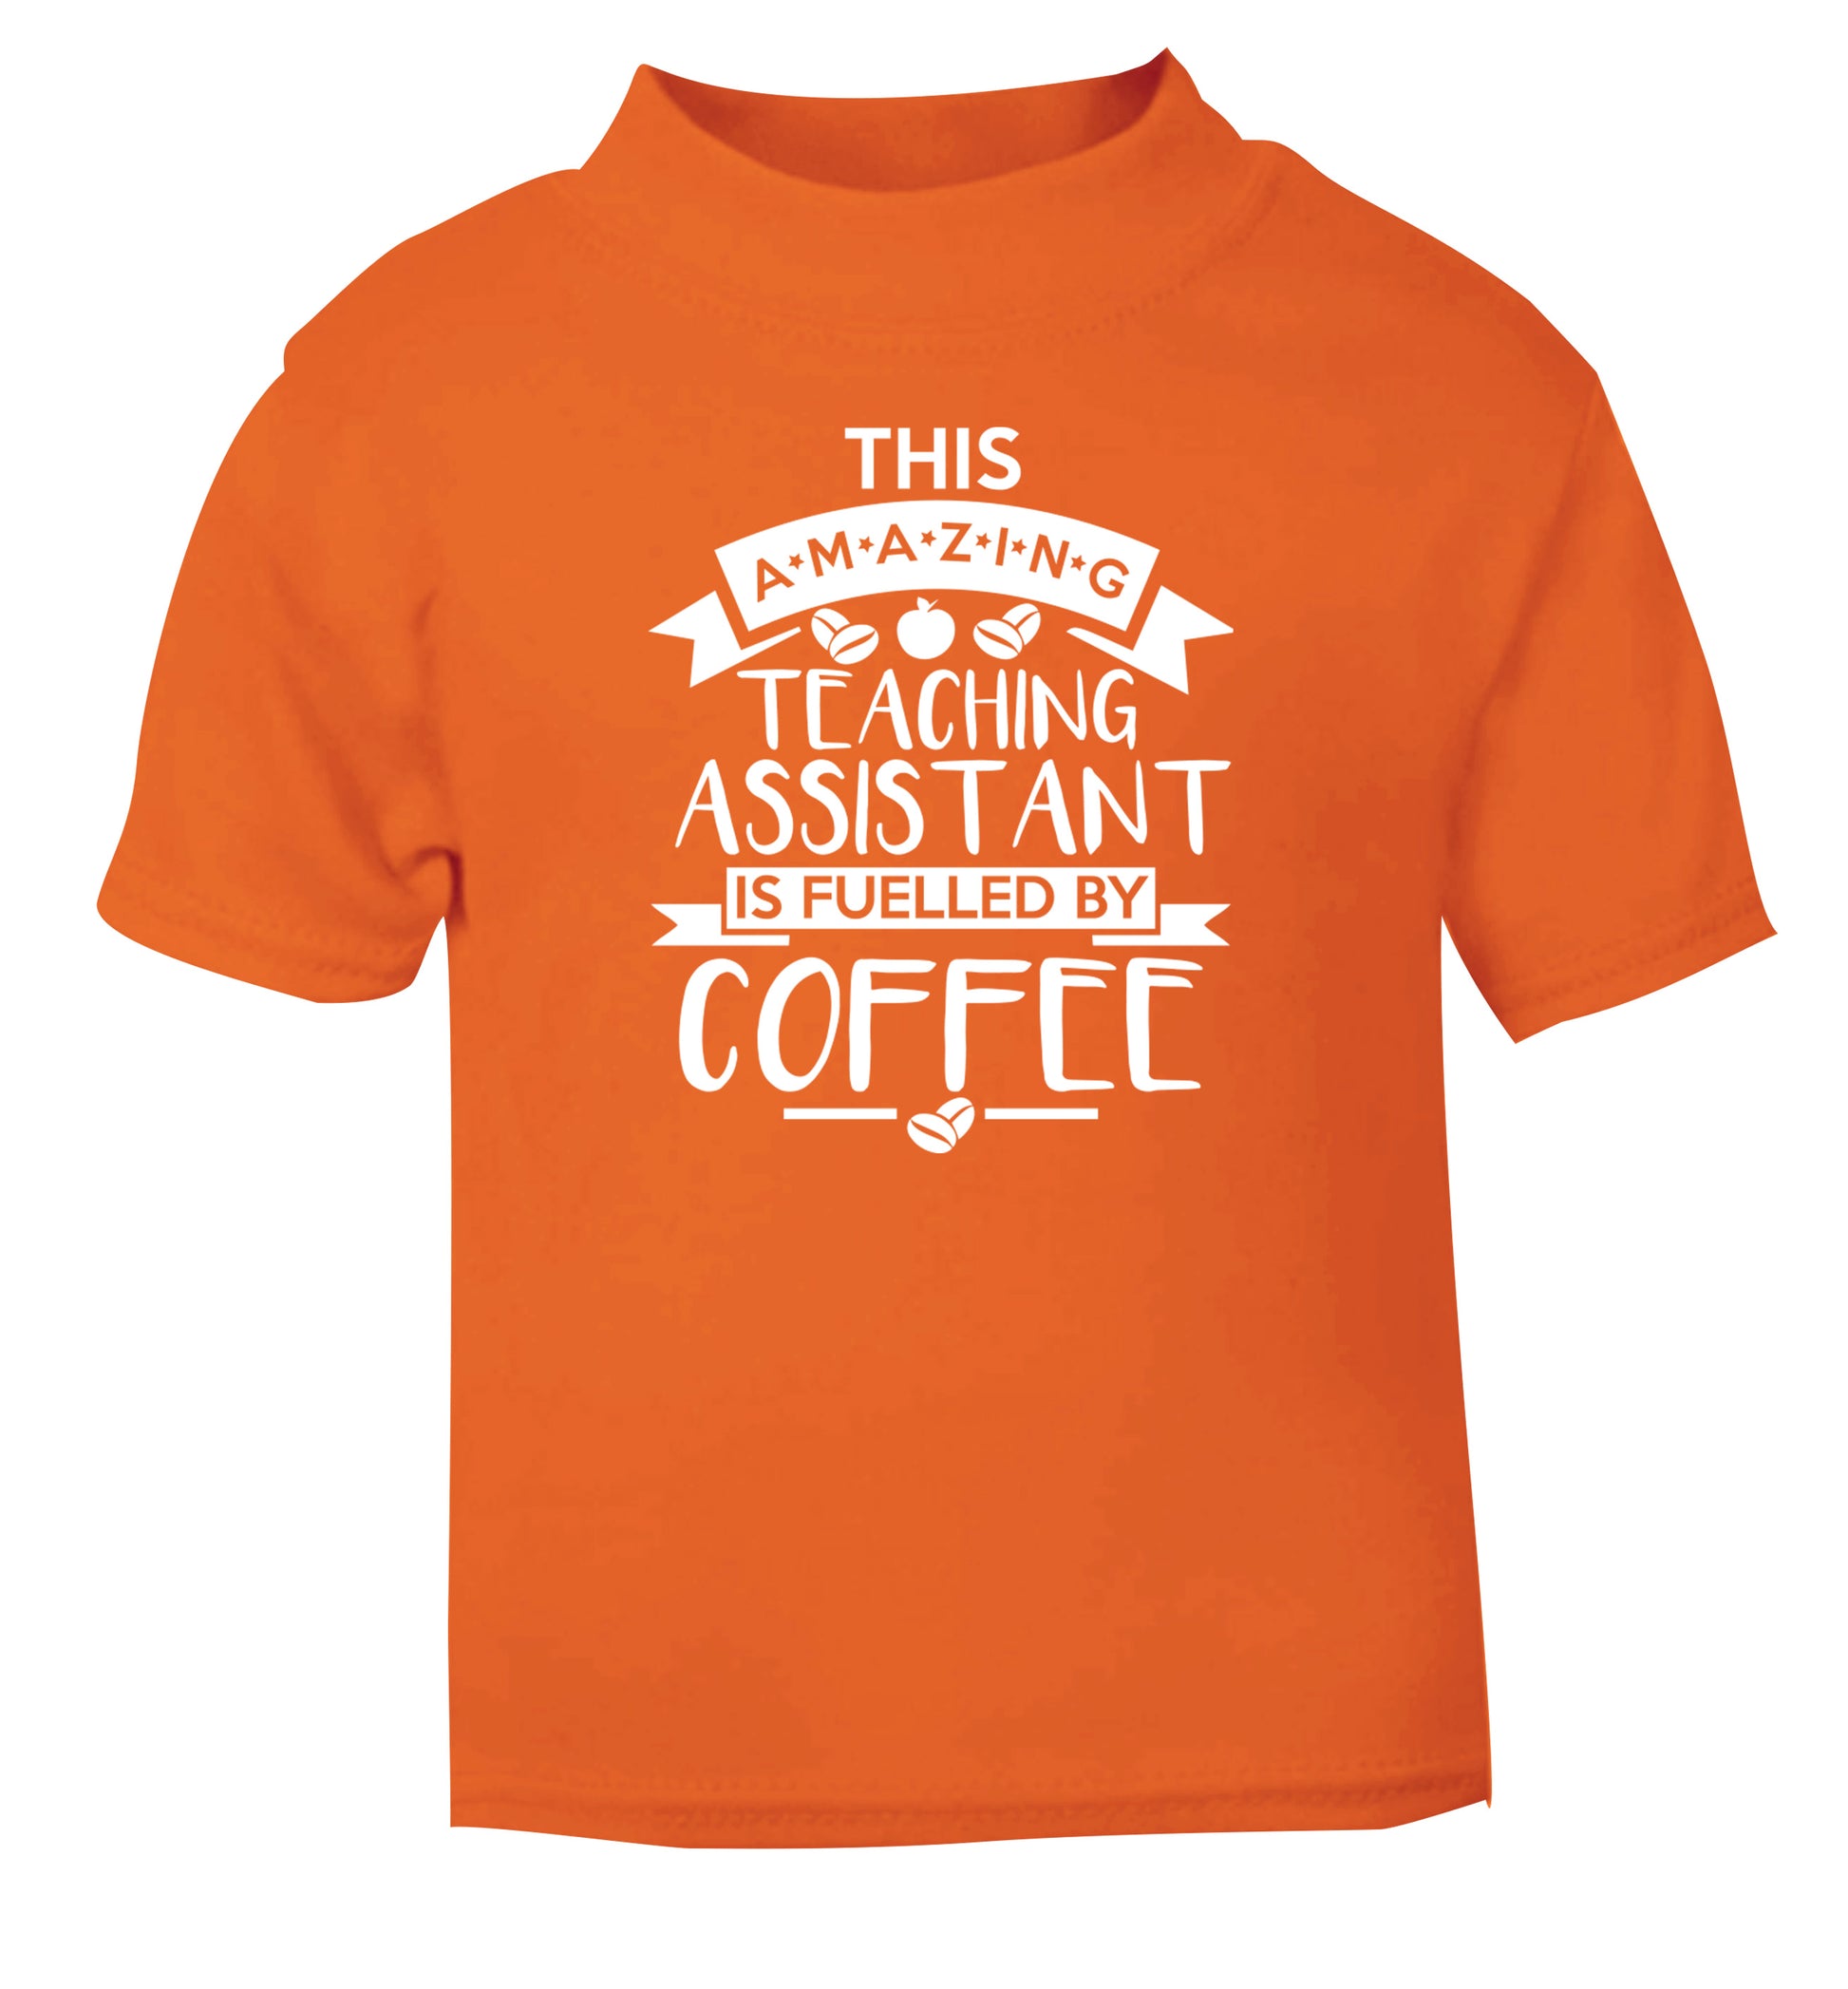 This amazing teaching assistant is fuelled by coffee orange Baby Toddler Tshirt 2 Years